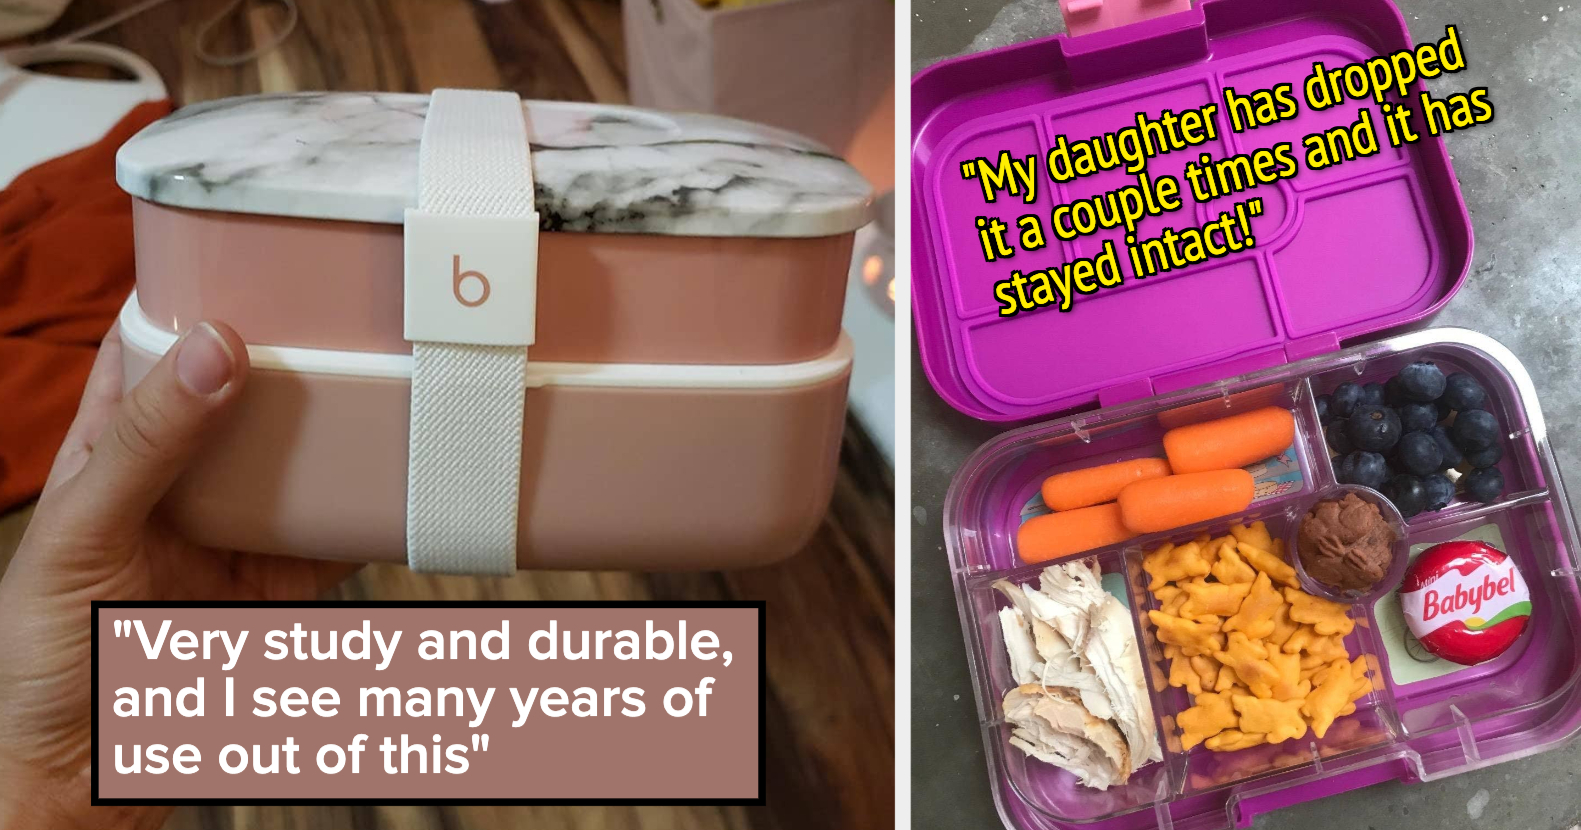 13 Of The Best Lunch Boxes You Can Get On